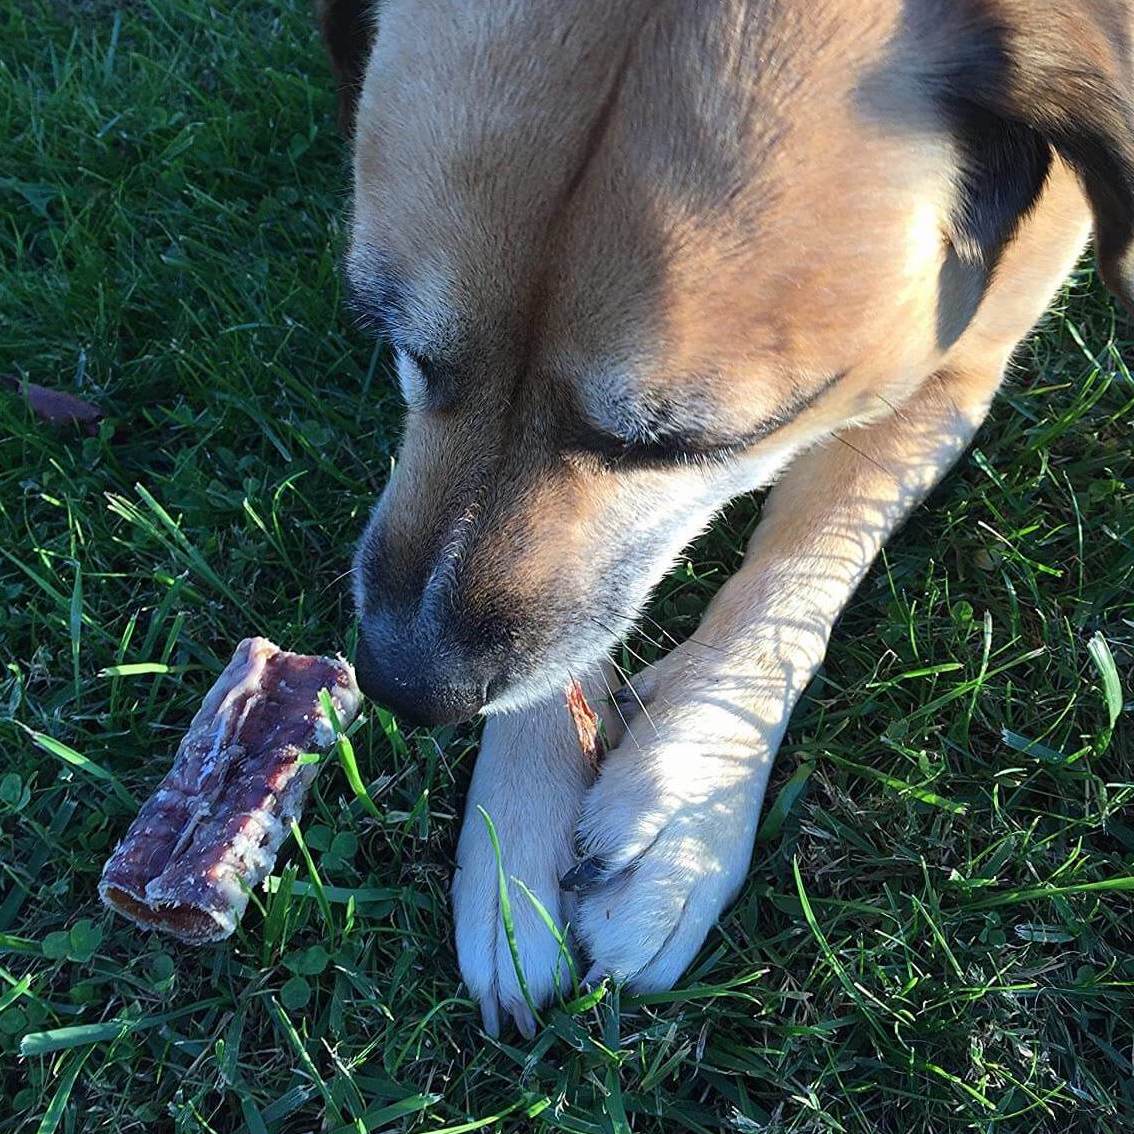 beef trachea for dogs